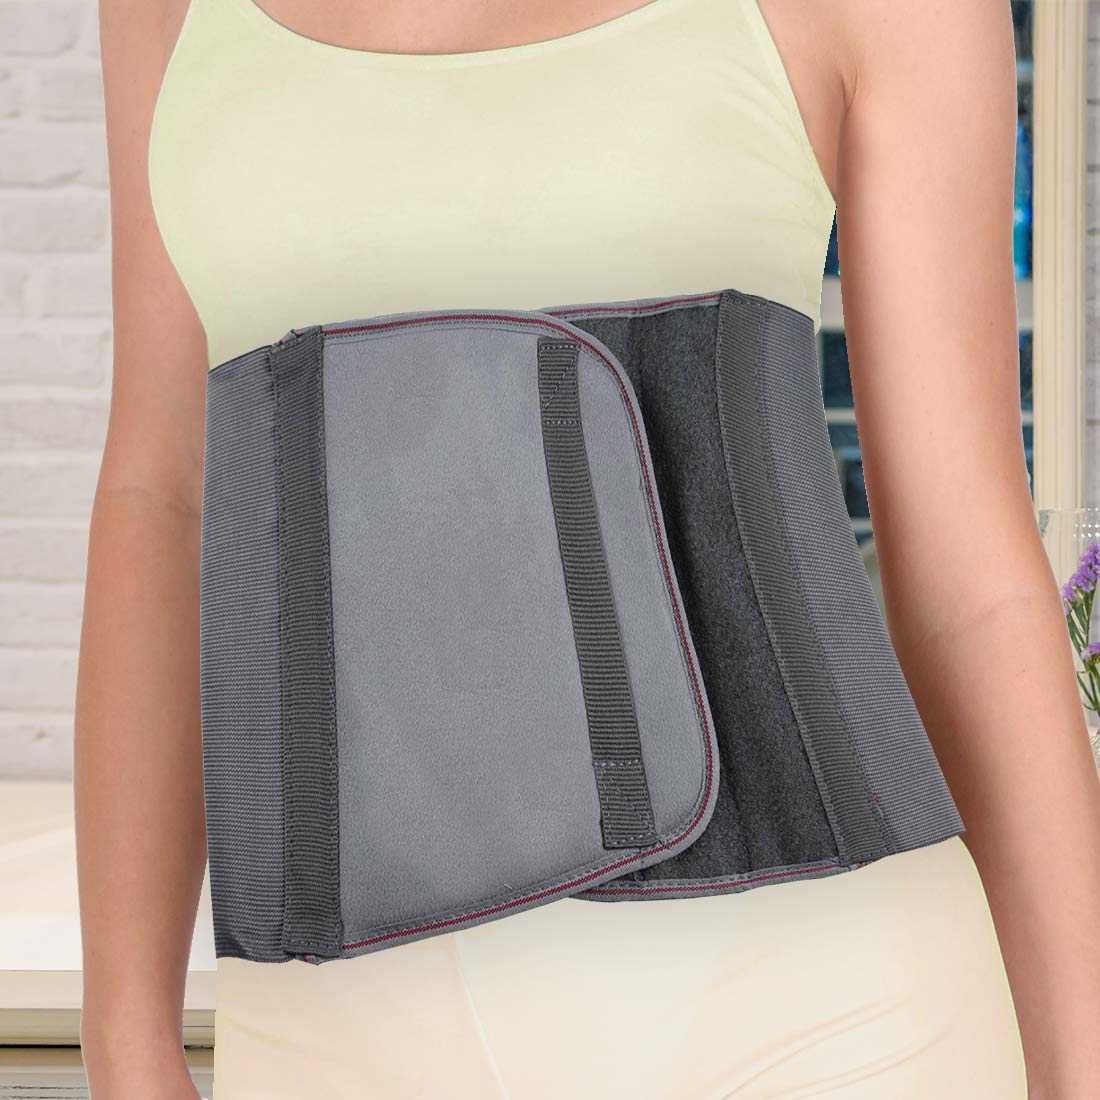 Post Pregnancy Support & Recovery Belt for Compression Support - M